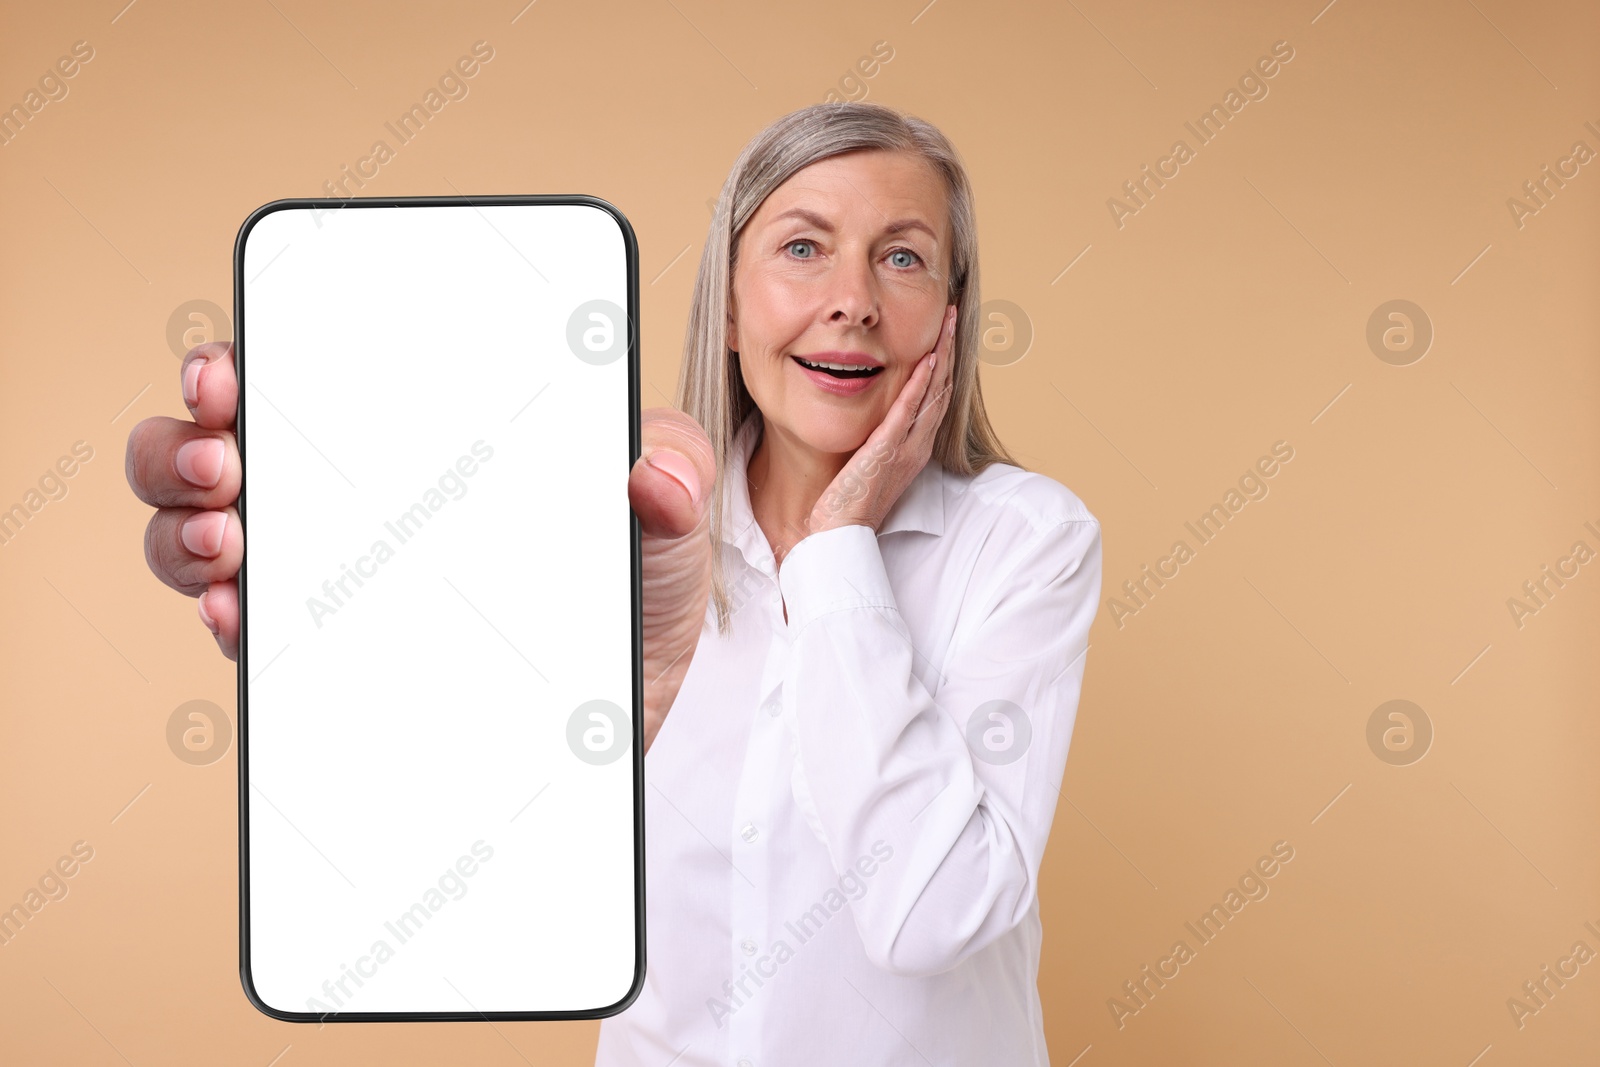 Image of Mature woman showing mobile phone with blank screen on beige background. Mockup for design